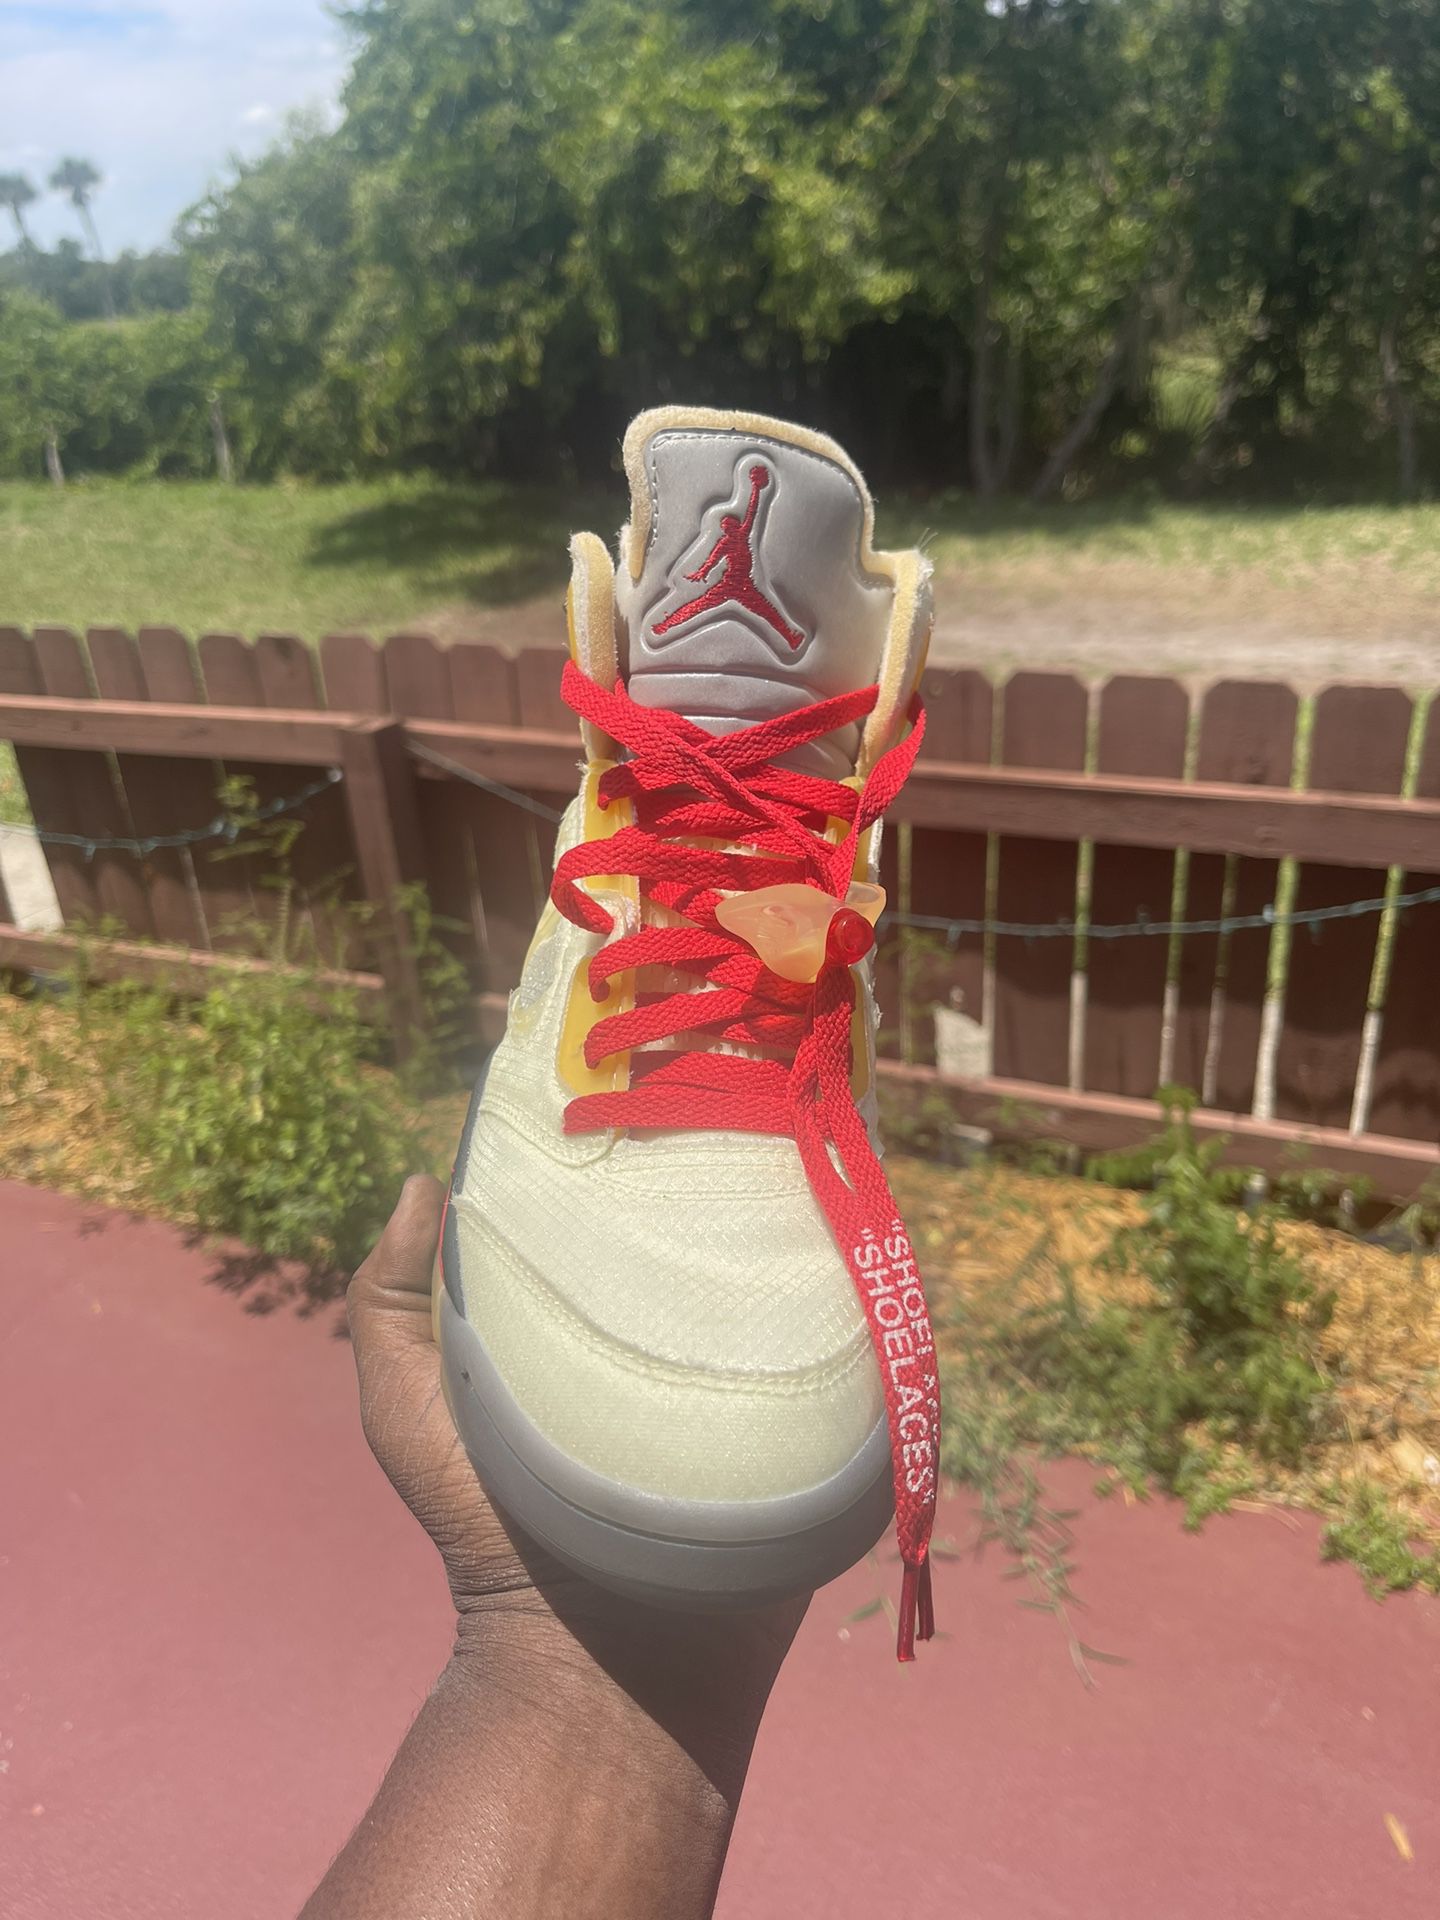 Nike Air Jordan 5 Retro SP Off White Grey Sail Size 9.5 for Sale in San  Diego, CA - OfferUp